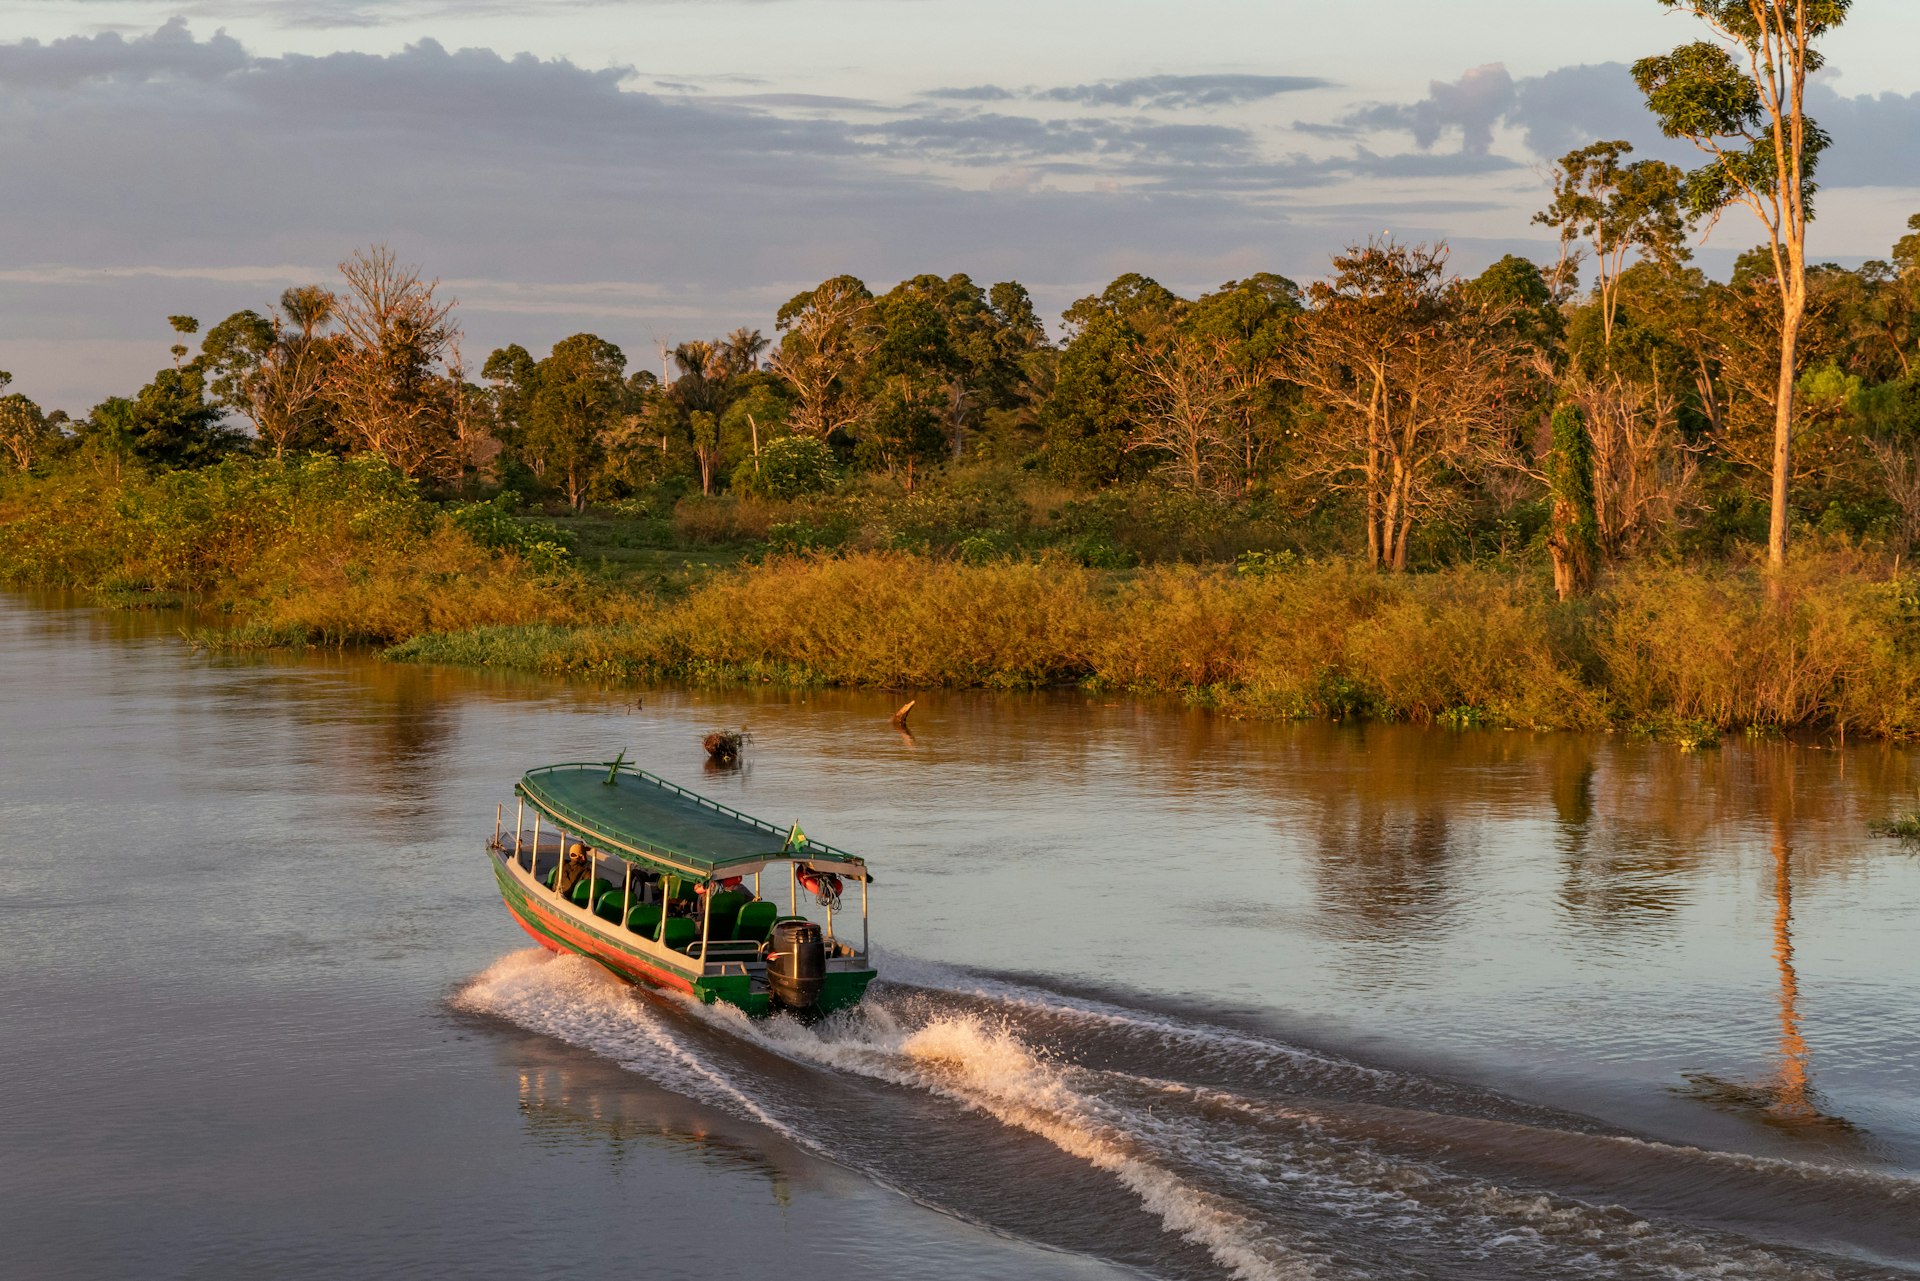 Passenger transport - speed boat at sunrise in the Amazon